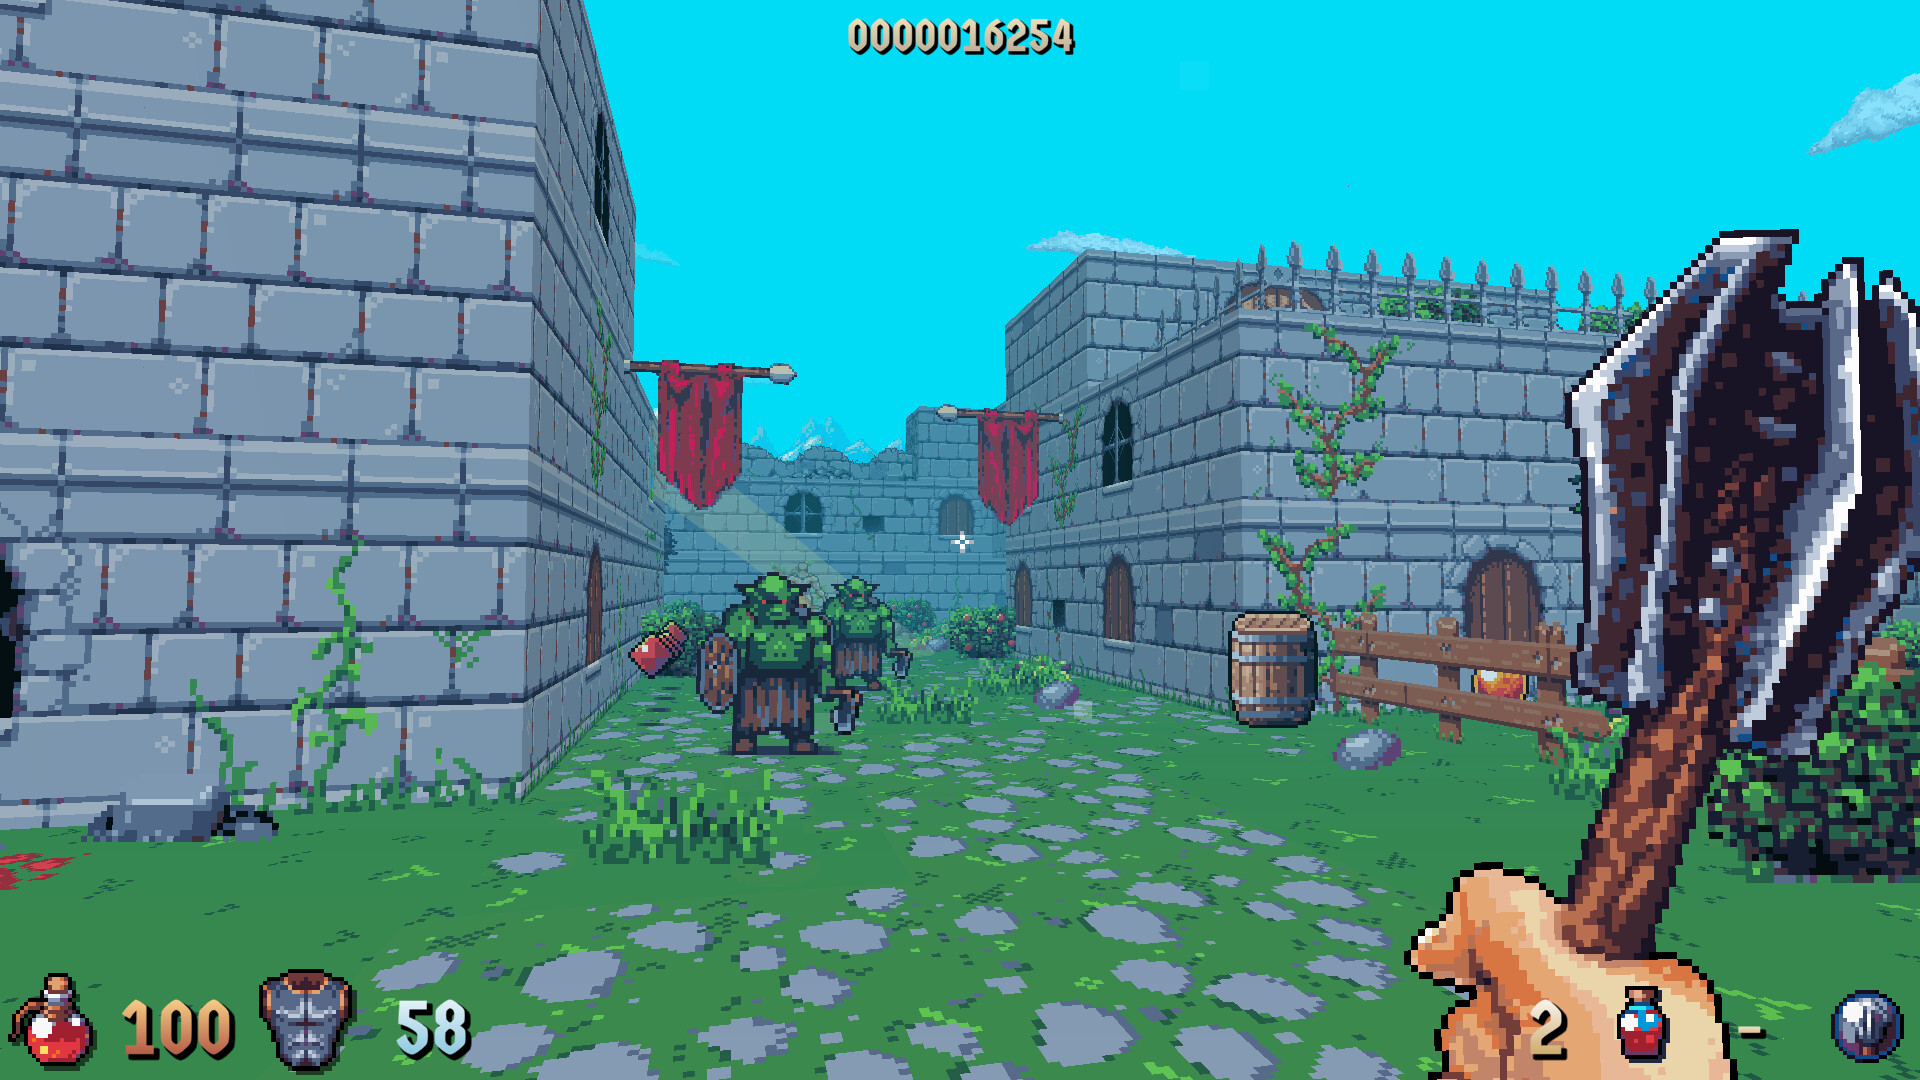 First person view of courtyard with goblins in foreground.